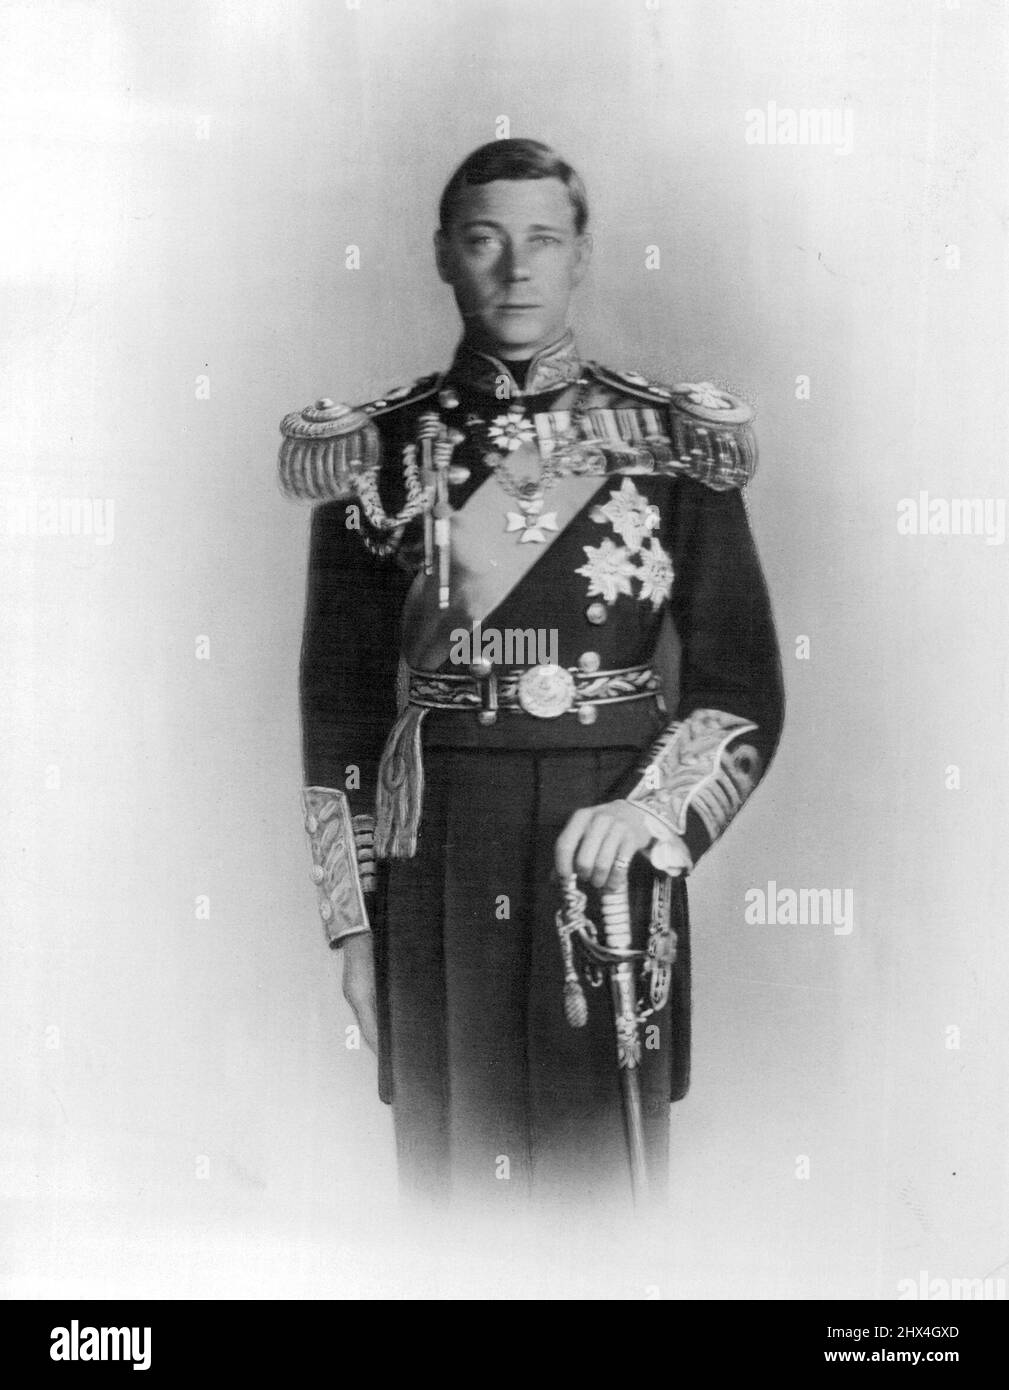 King Edward VIII, First Bachelor King Of England For 176 Years. Edward, Prince Of Wales, was Proclaimed King Of England on January 22nd 1936, following the death of his father King George V, which occurred at the age of 70, at Sandringham, on January 20th. The New King is the First bachelor monarch to reign in England for 176 years. February 16, 1936. Stock Photo